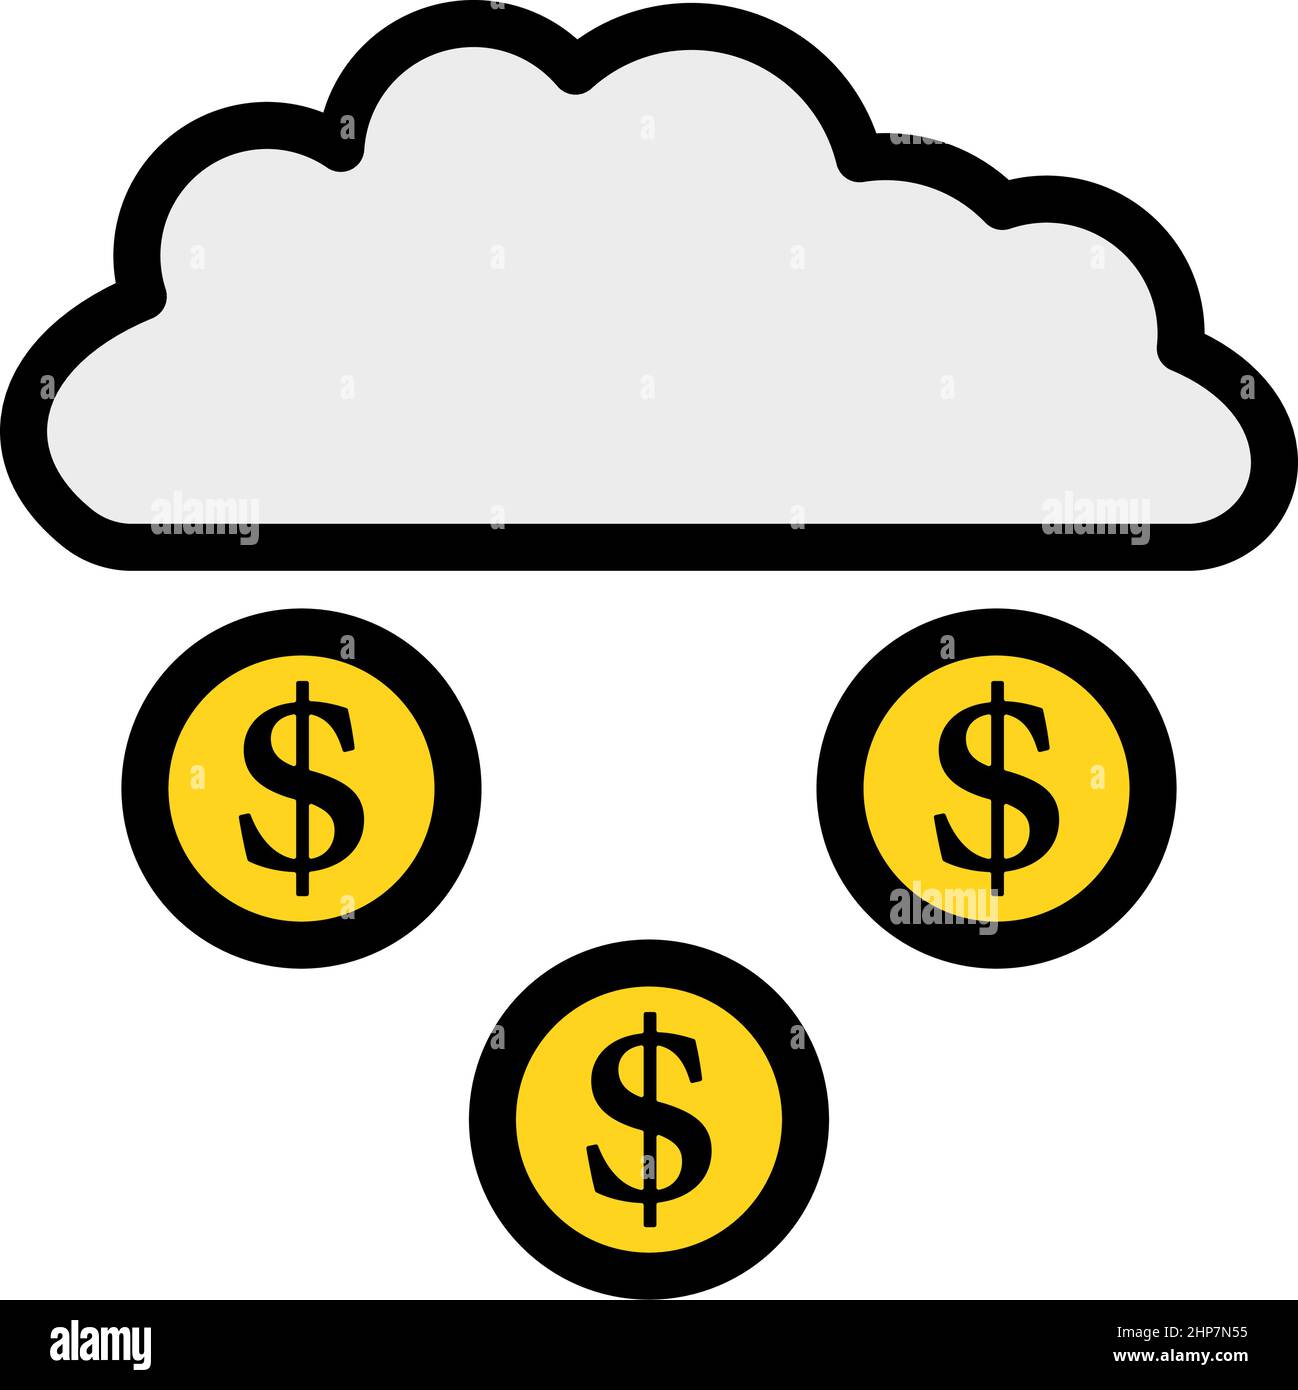 Coins Falling From Cloud Icon Stock Vector